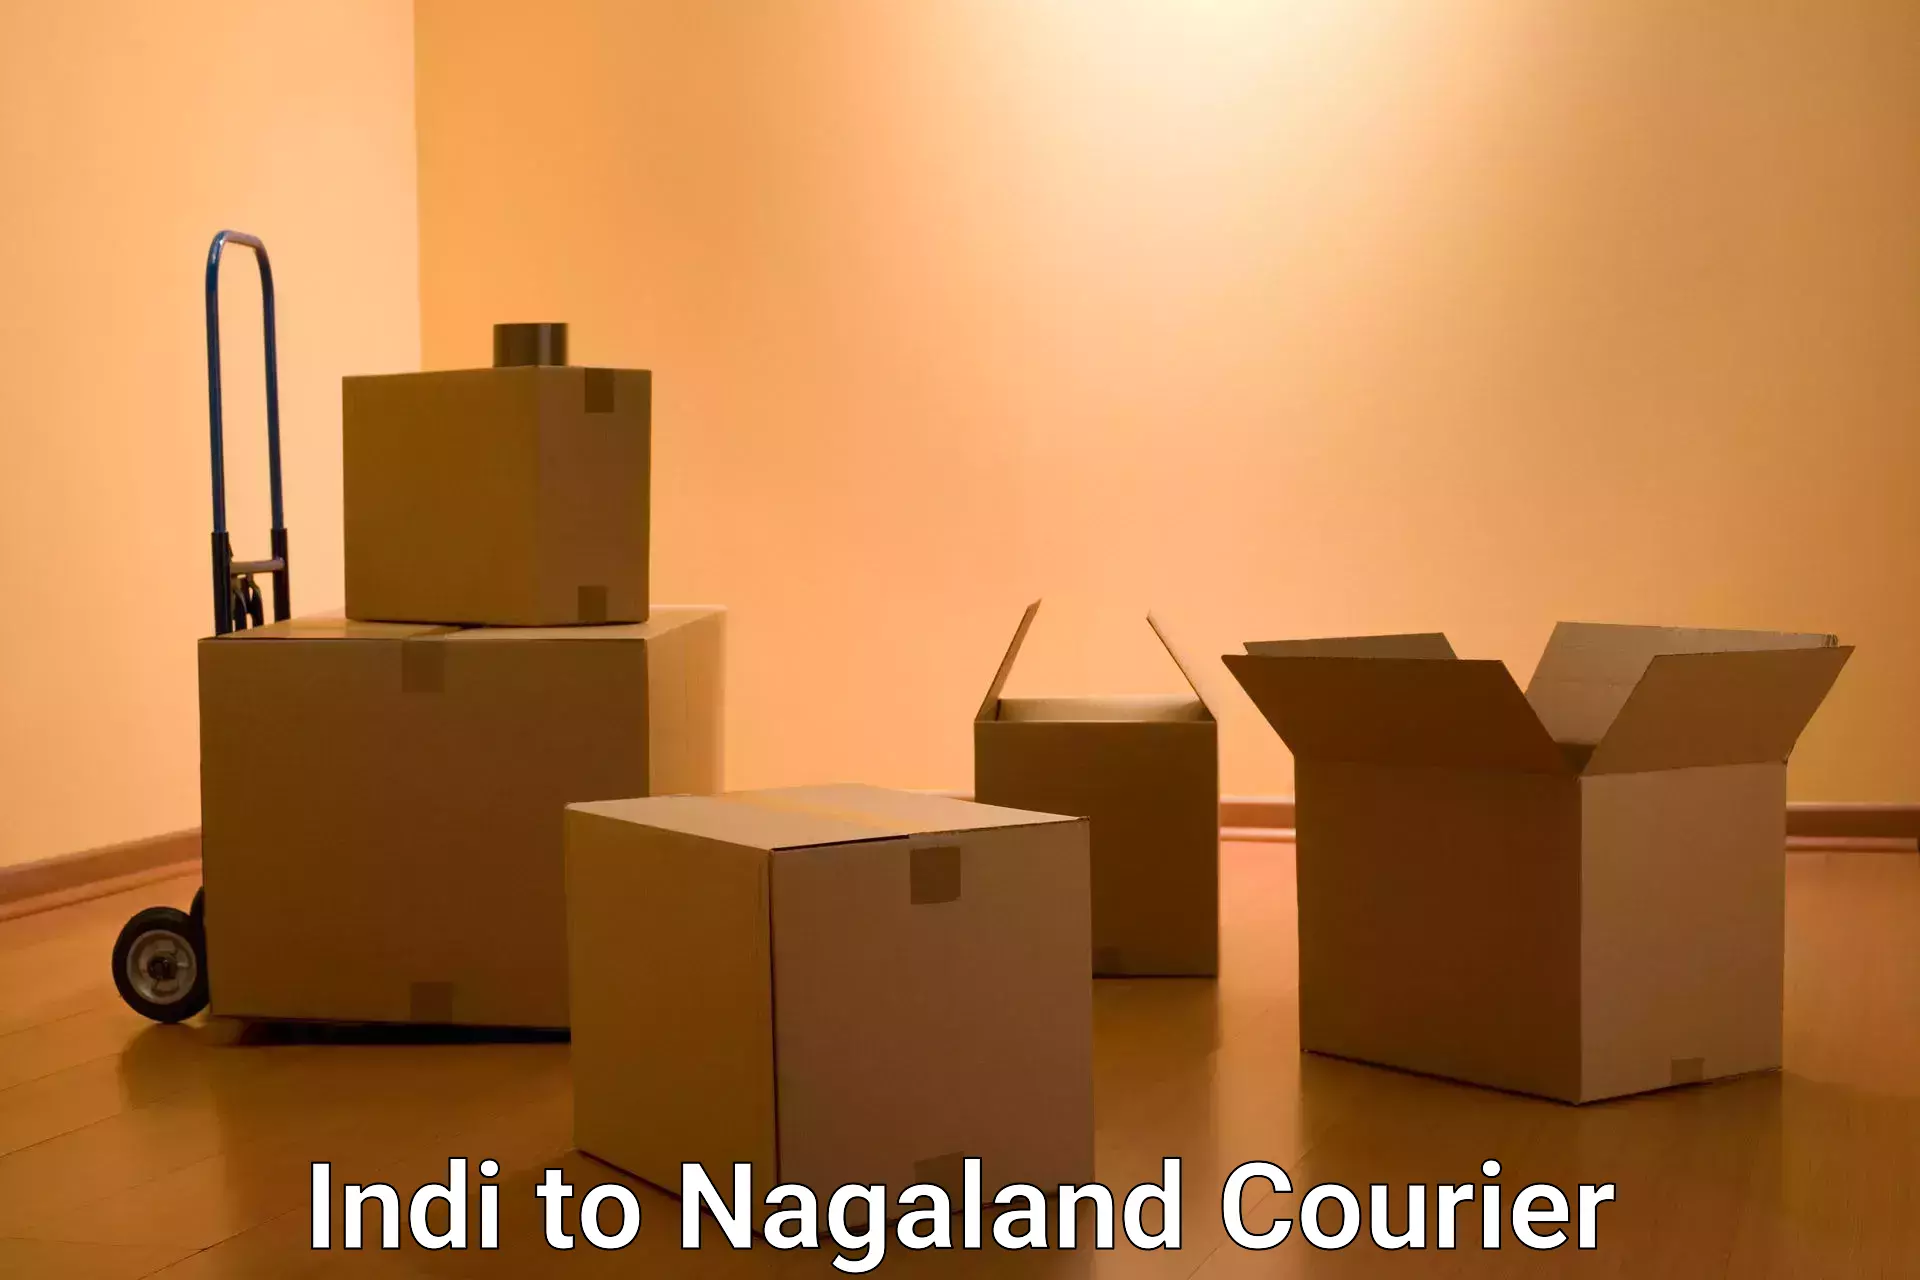 Flexible delivery schedules Indi to Nagaland